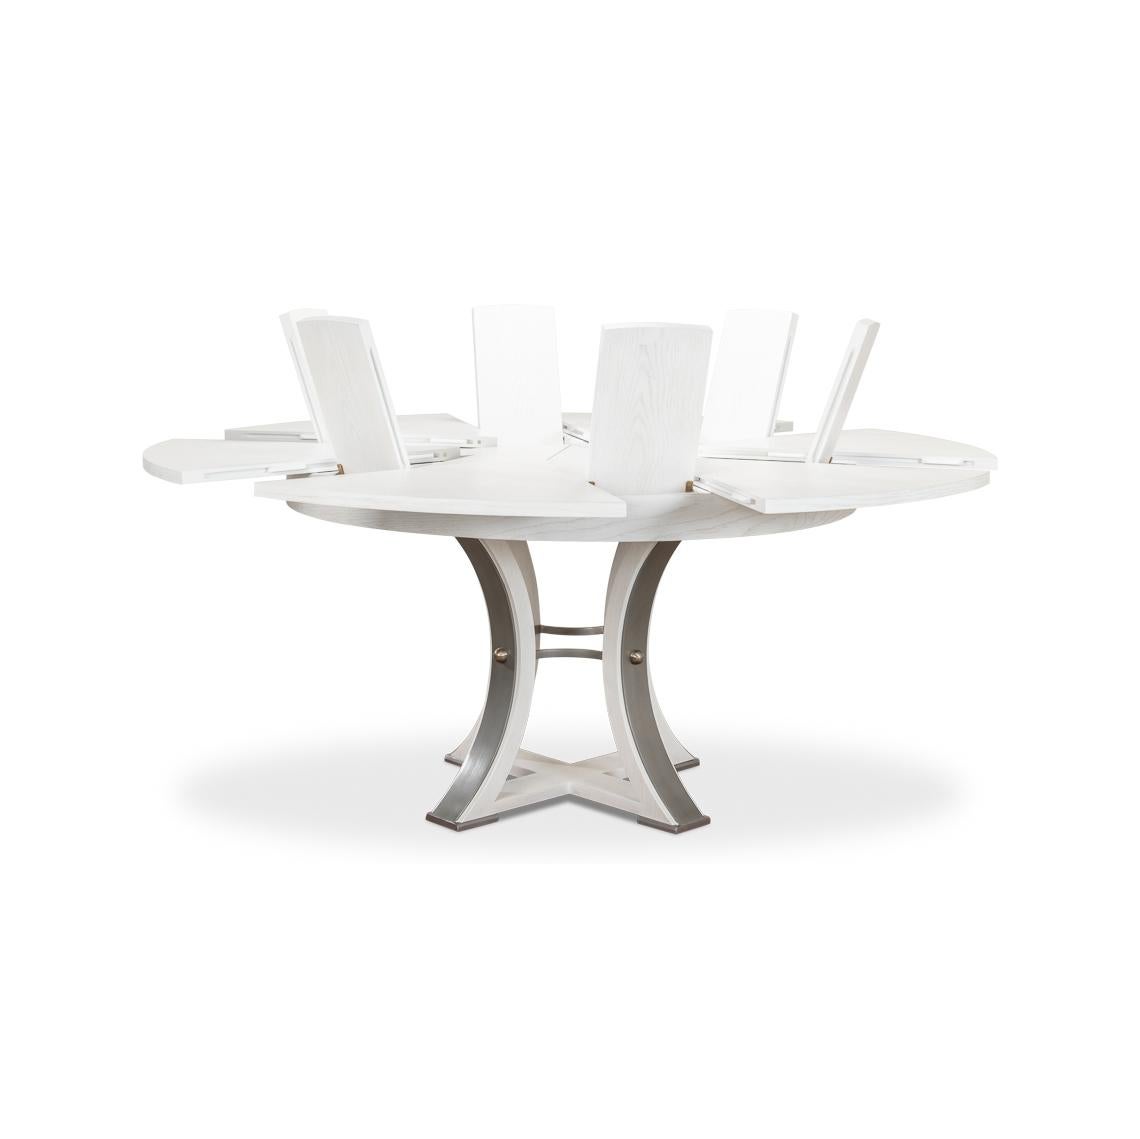 Vietnamese Modern Industrial Dining Table - 70 - Working White For Sale